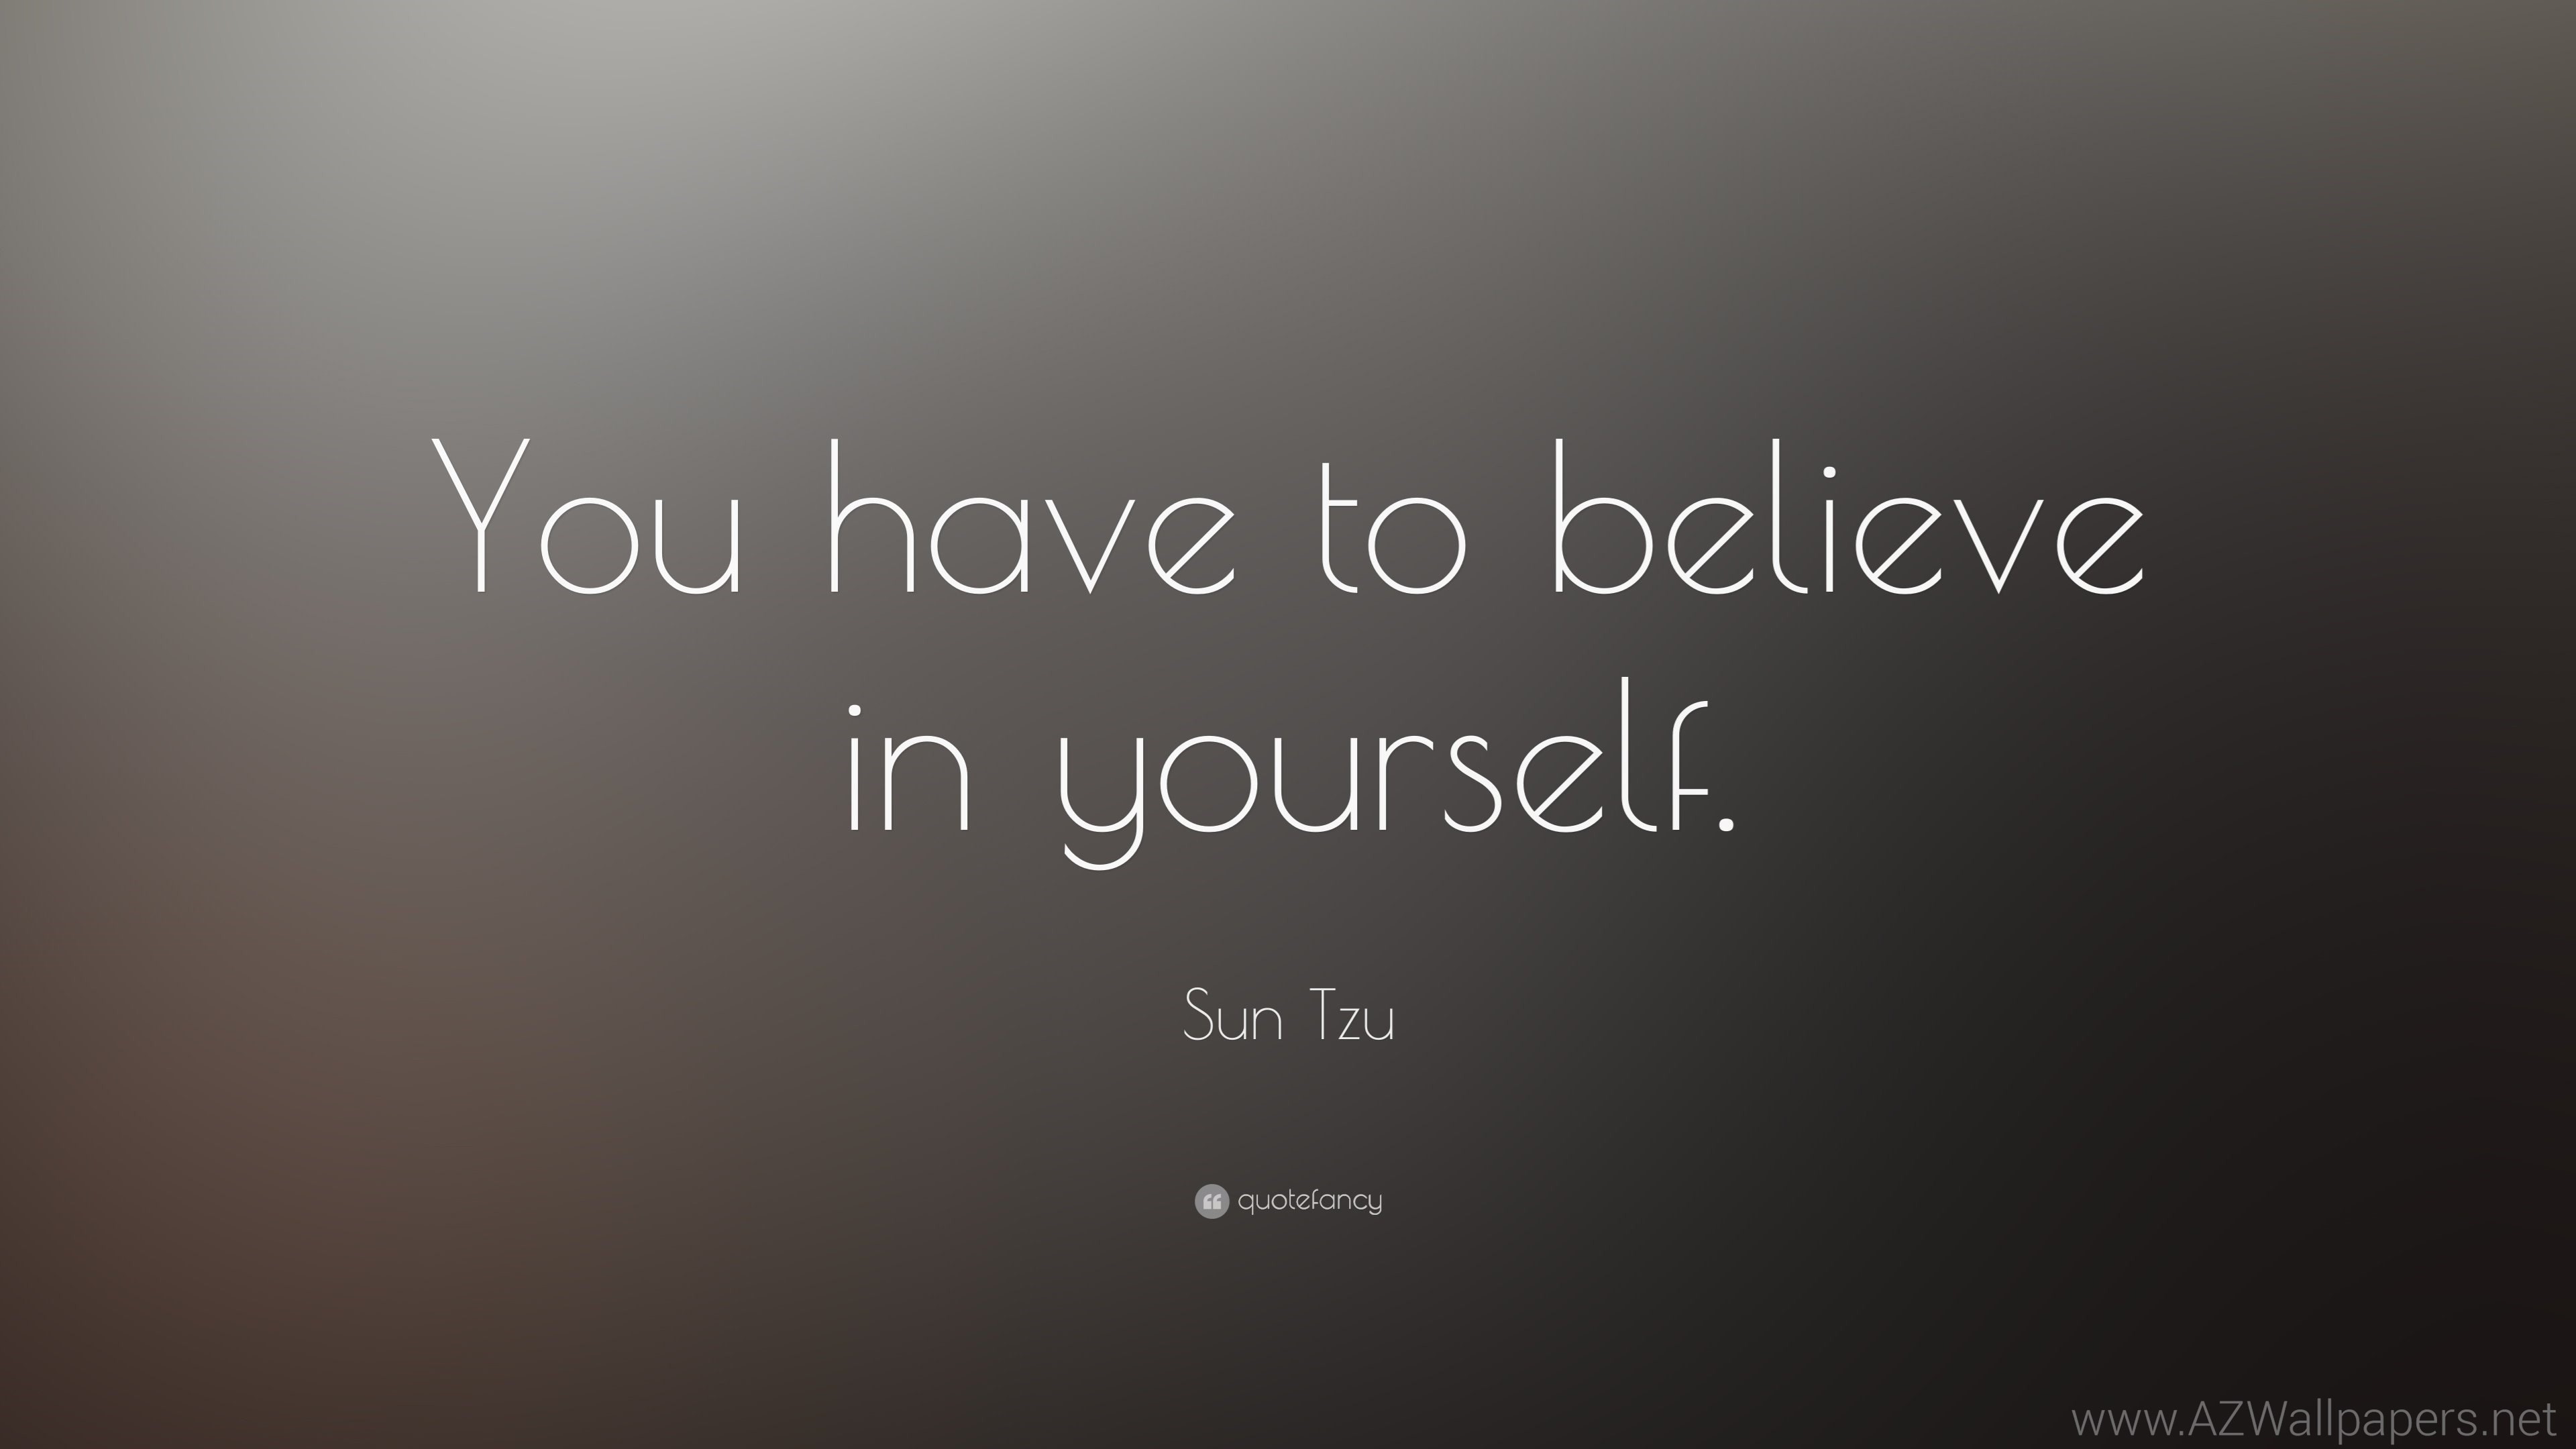 3840x2160 ... sun tzu quote you have to believe in yourself 13 wallpapers ...